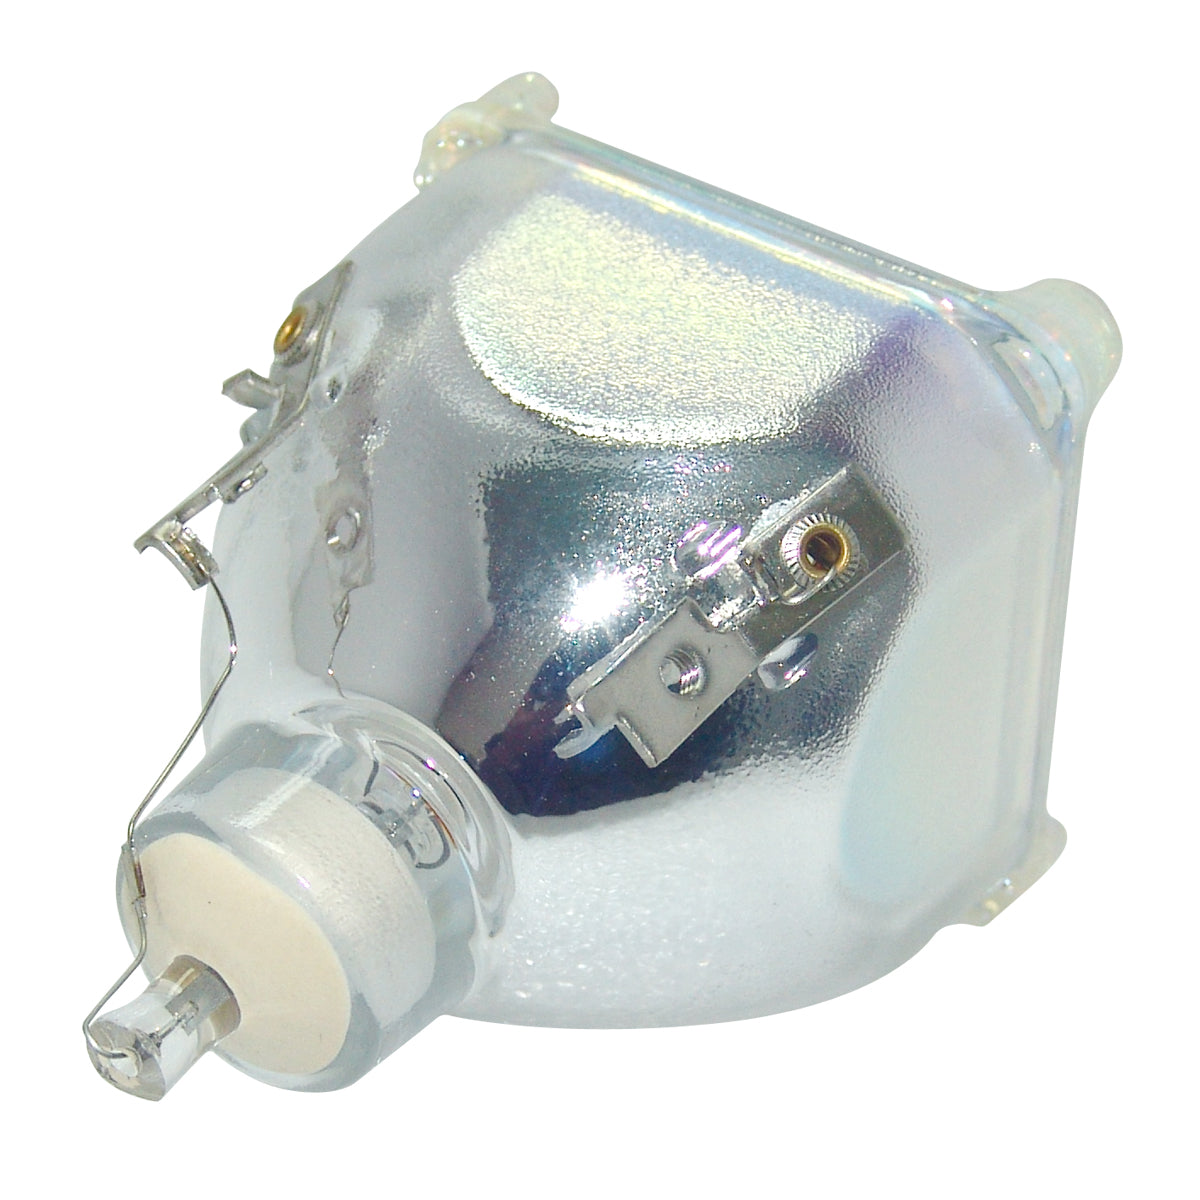 Seleco DT00301 Osram Projector Bare Lamp